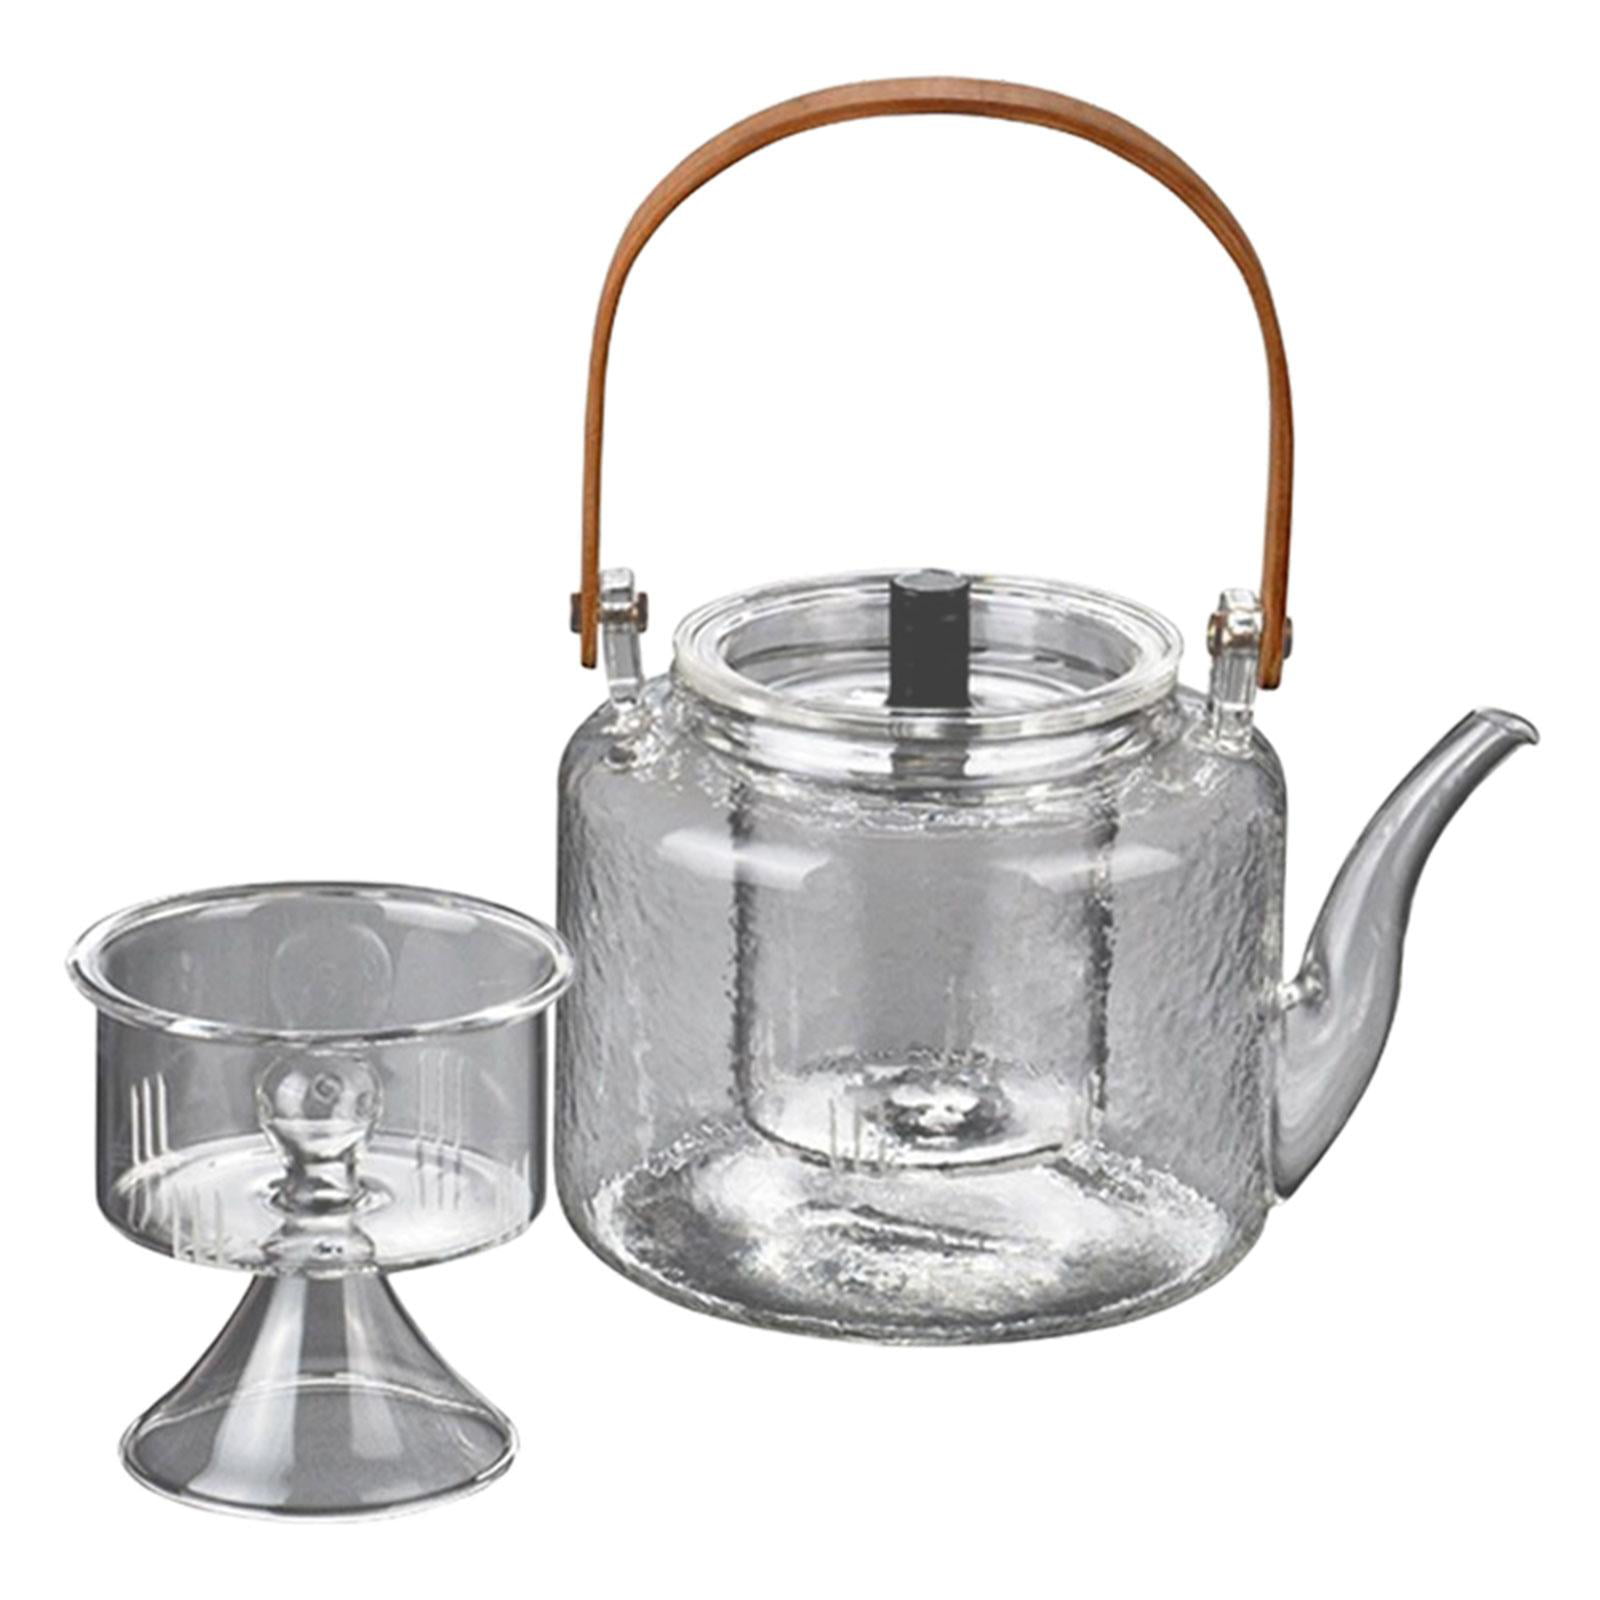 1000ML Clear Glass Heat Resistant Infuser Teapot Induction Cooker Kettle TEA 1200 ml 1000ML 